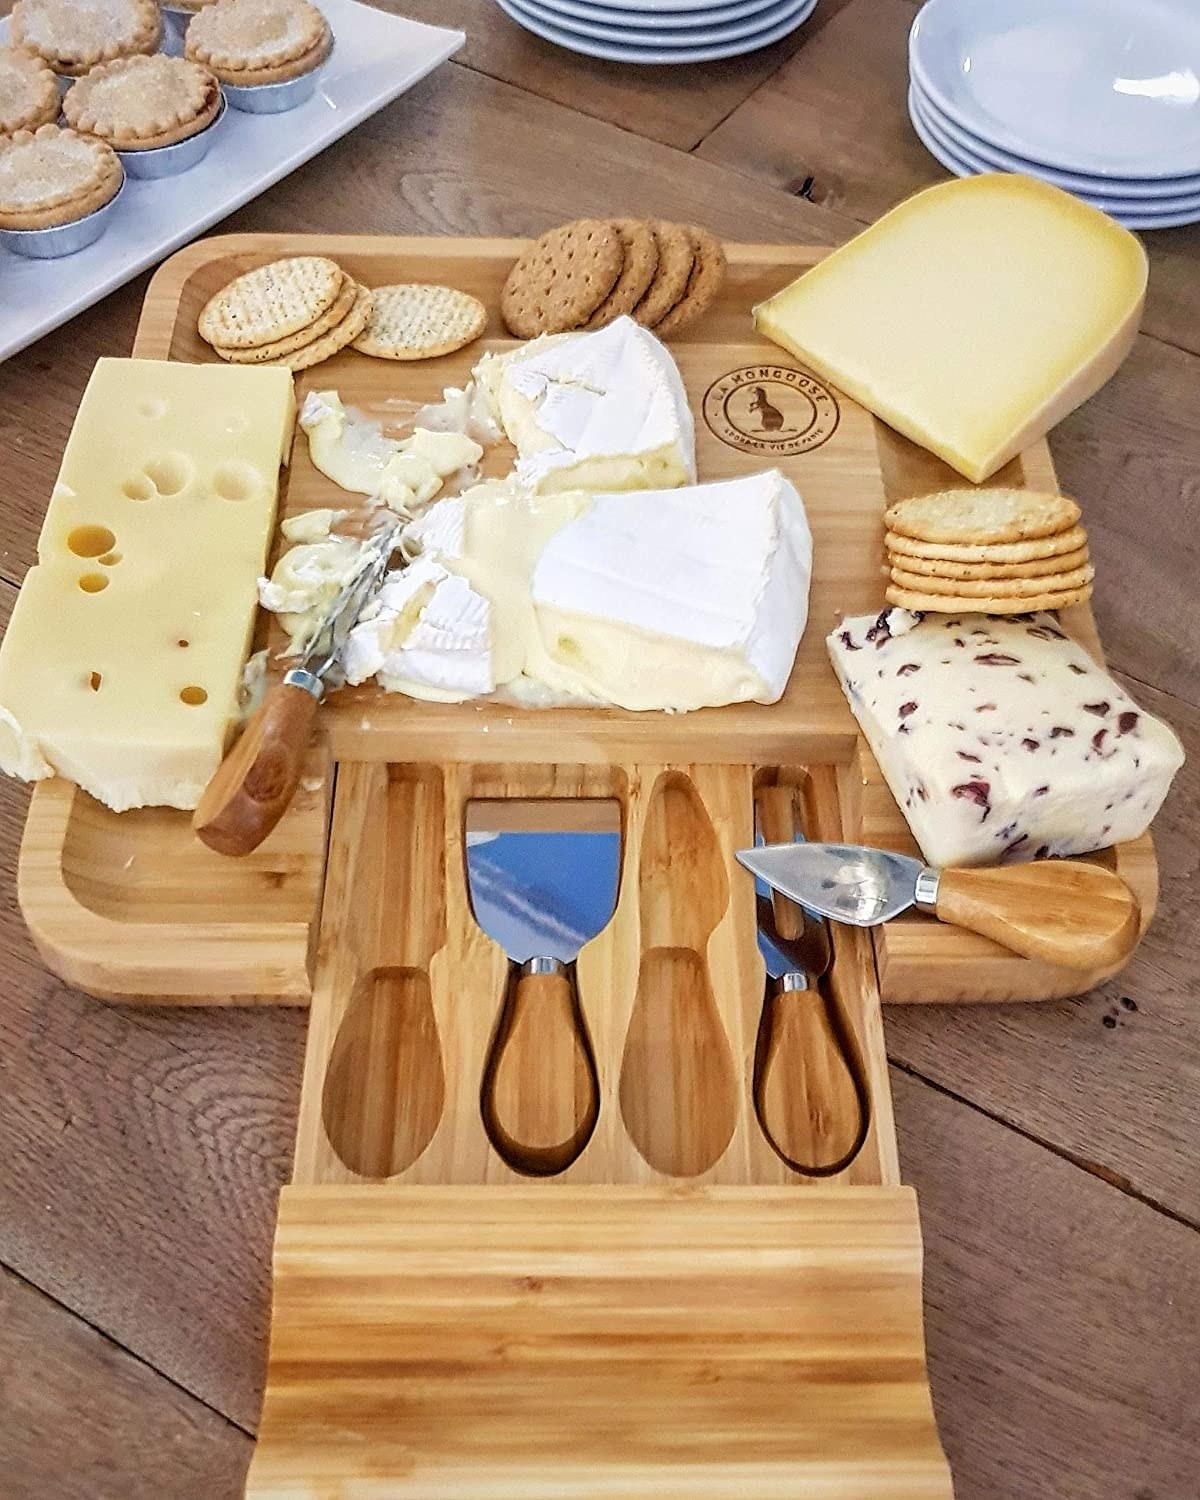 the cheese board with cheeses and the knives